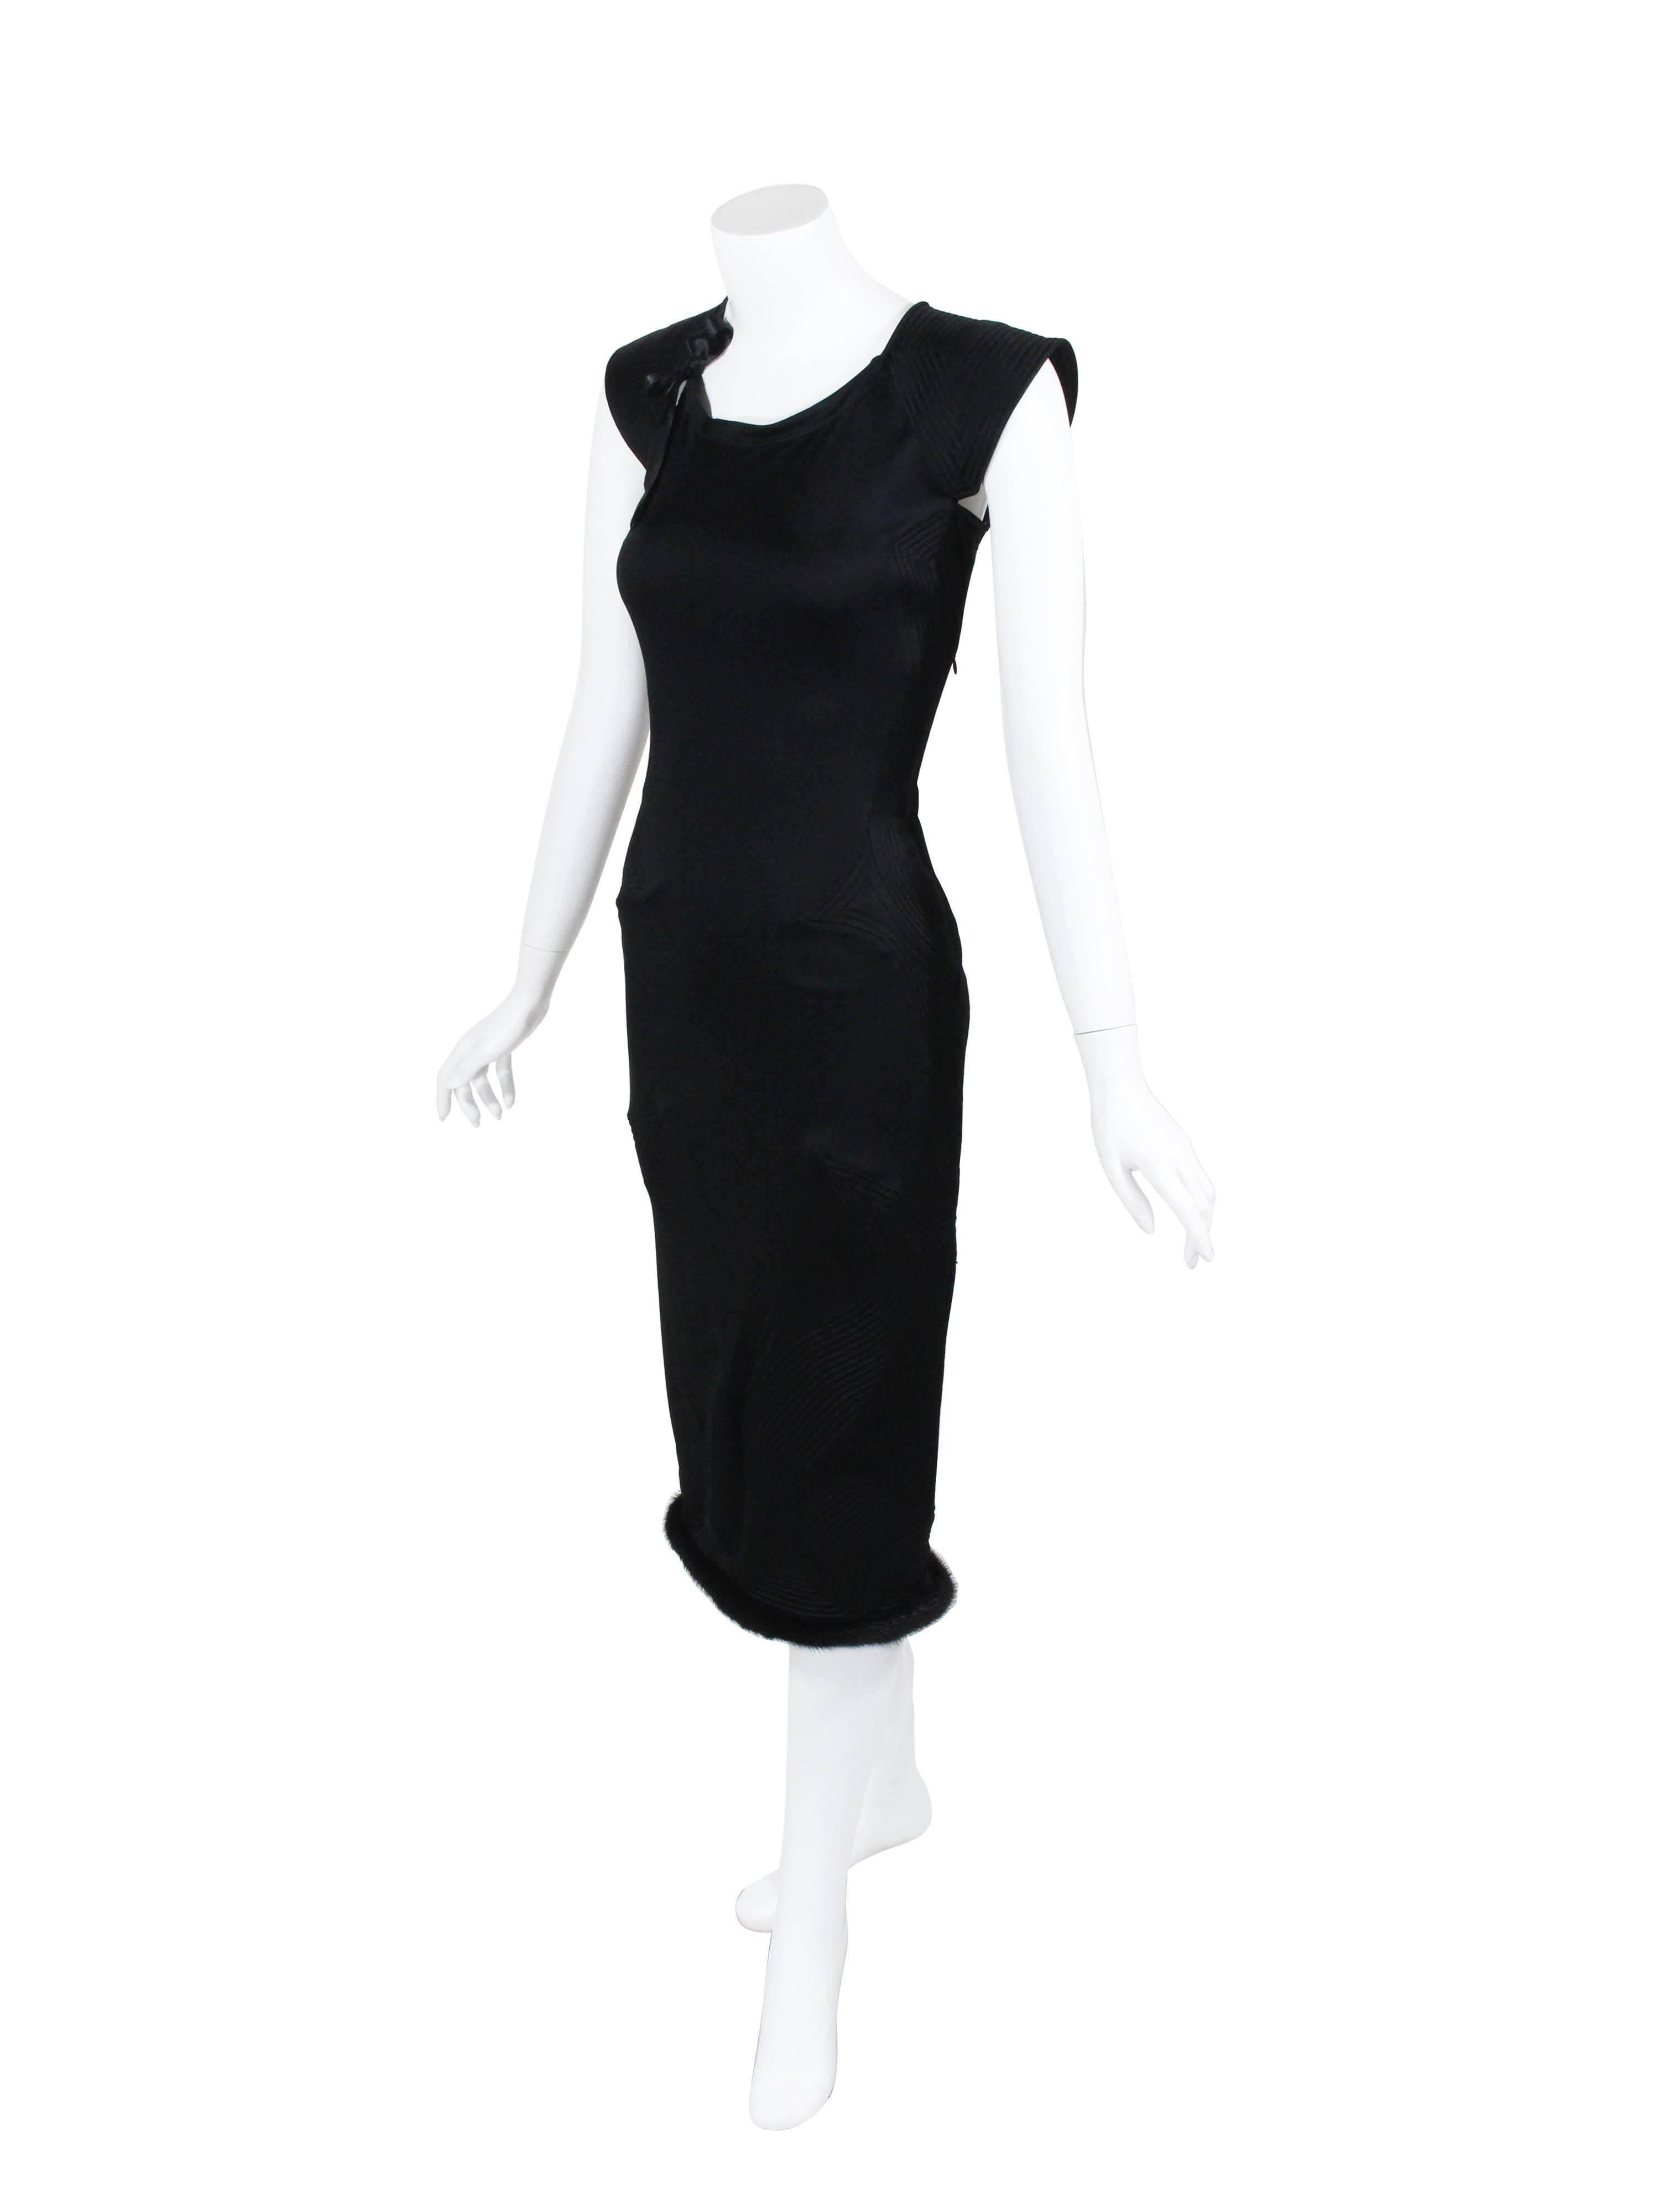 An Yves saint Laurent dress by Tom Ford from his final and most memorable collection for the house. Done in a luxurious jet black silk jersey with beautiful detail work of trapunto stitching designs. A silk ribbon at the neckline and finished at the